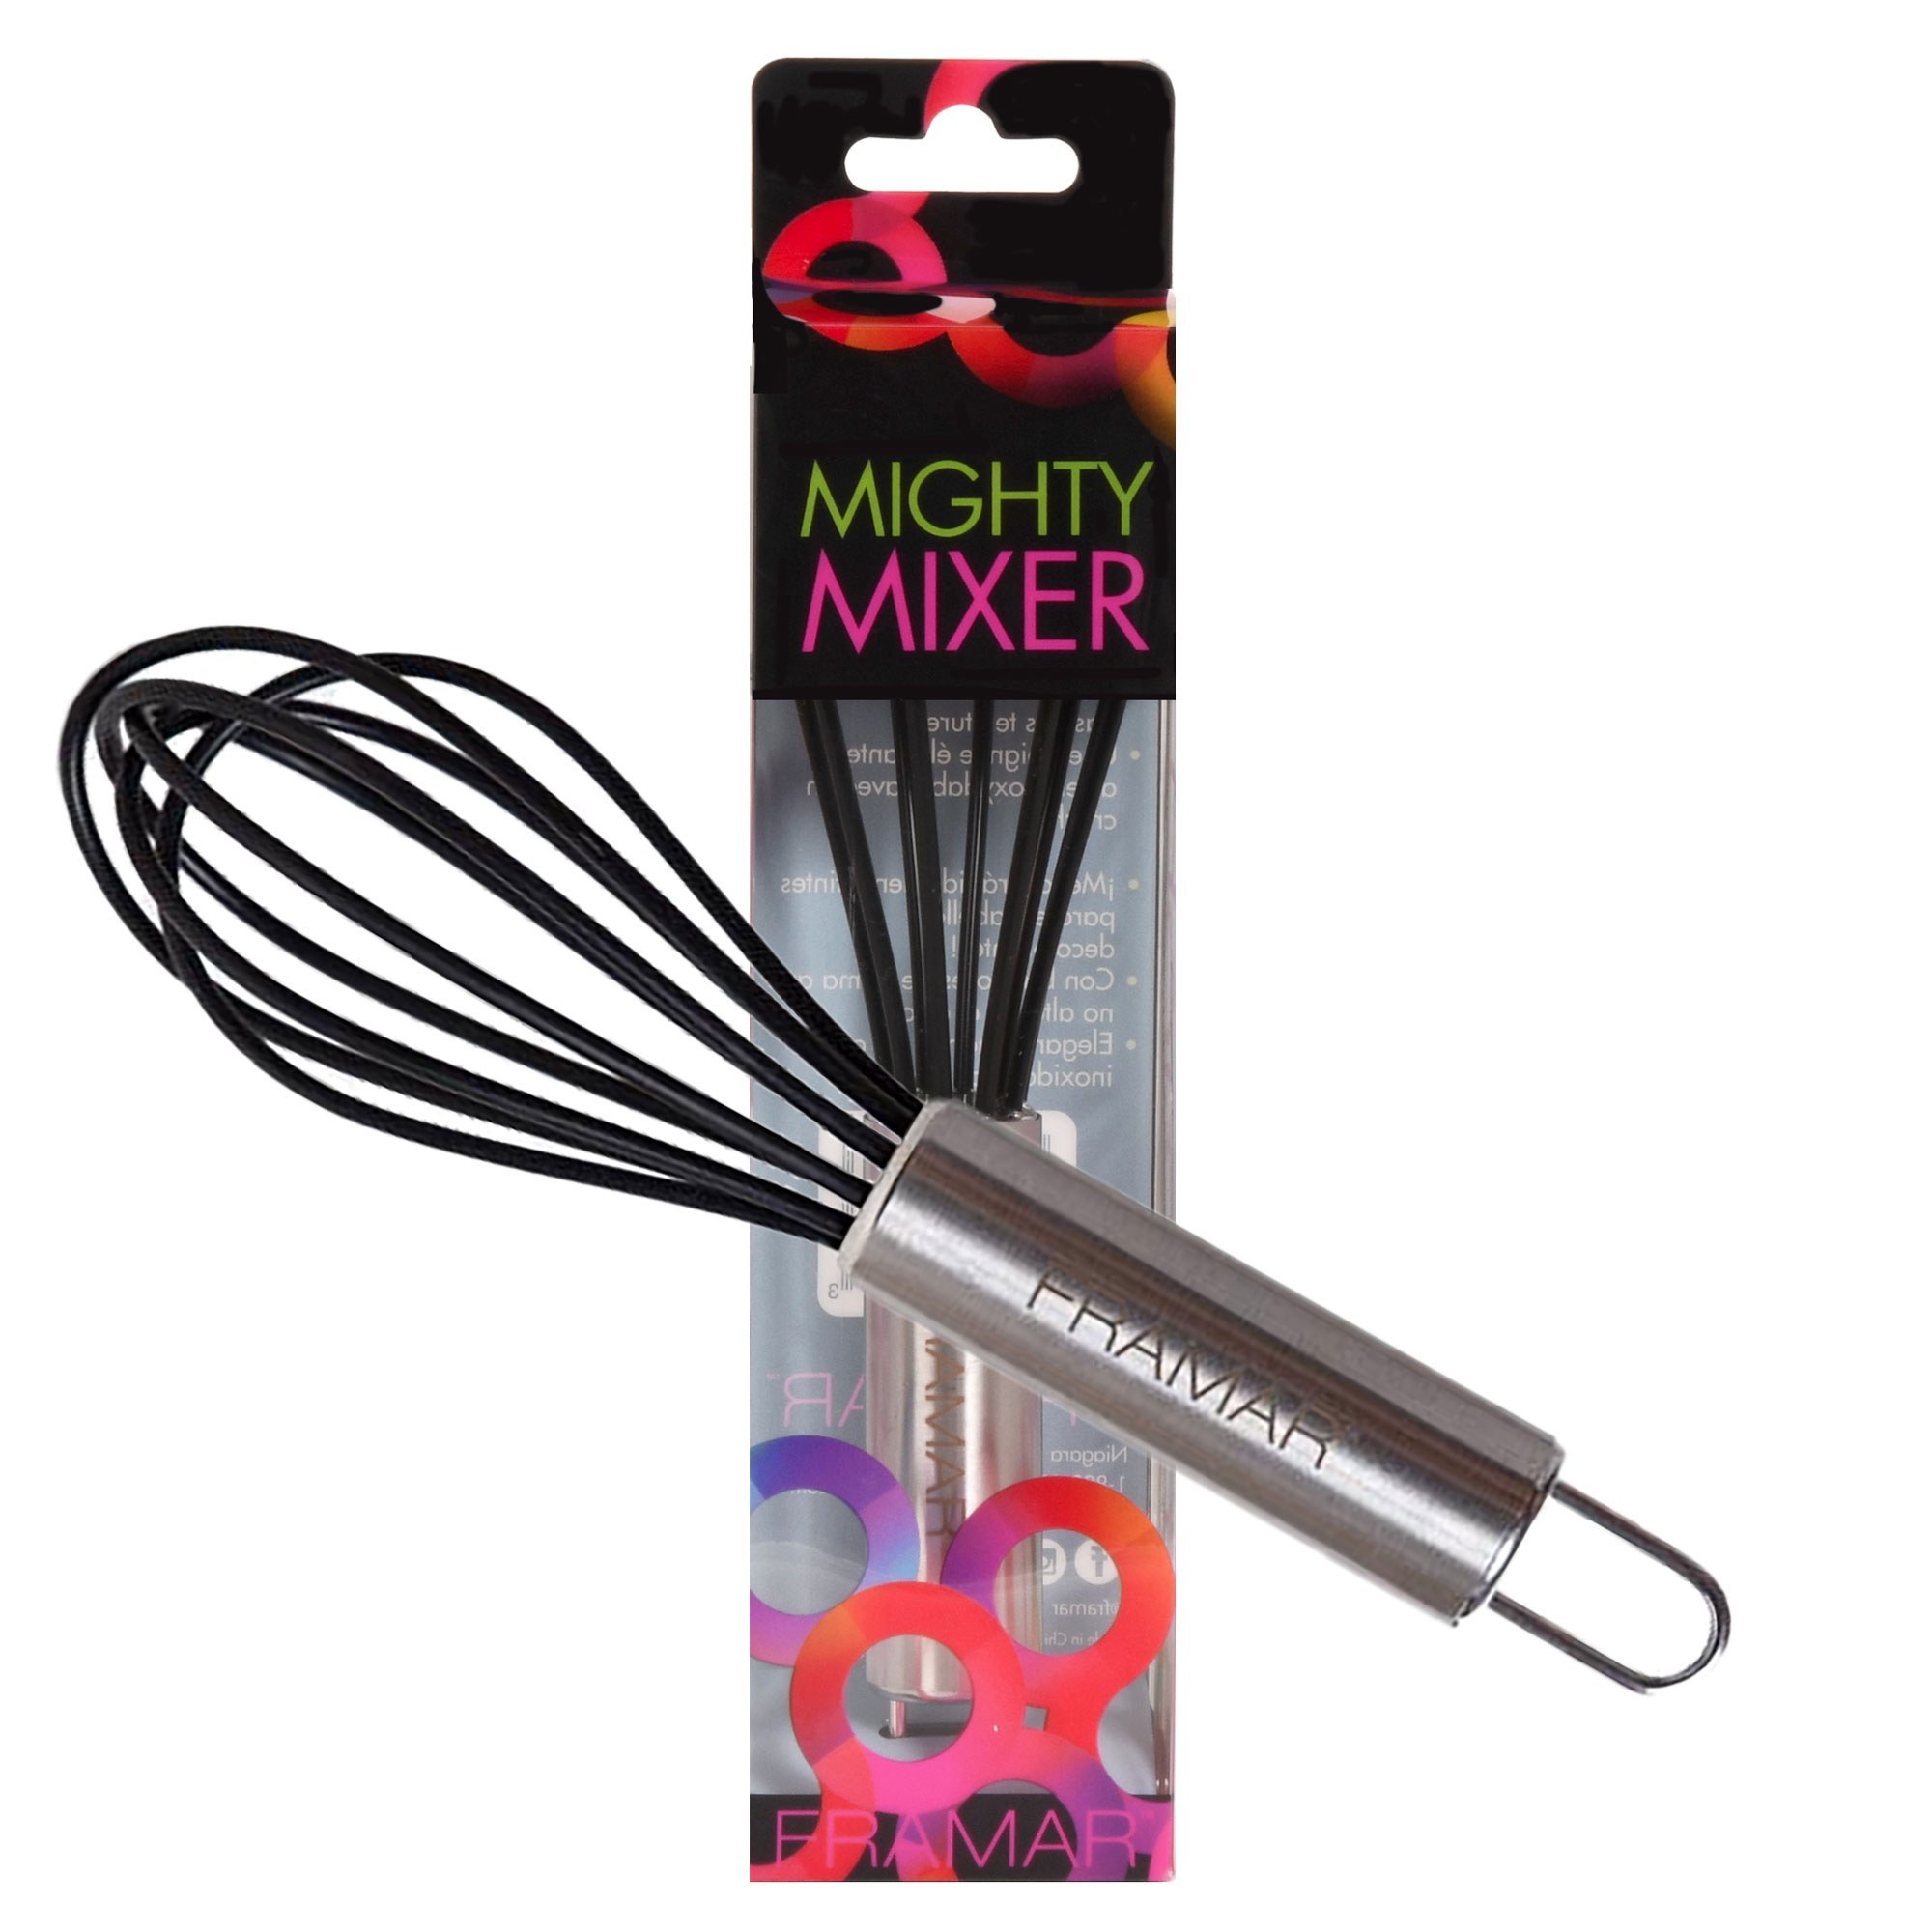 Framar TOYS: Mighty Mixer Color Whisk